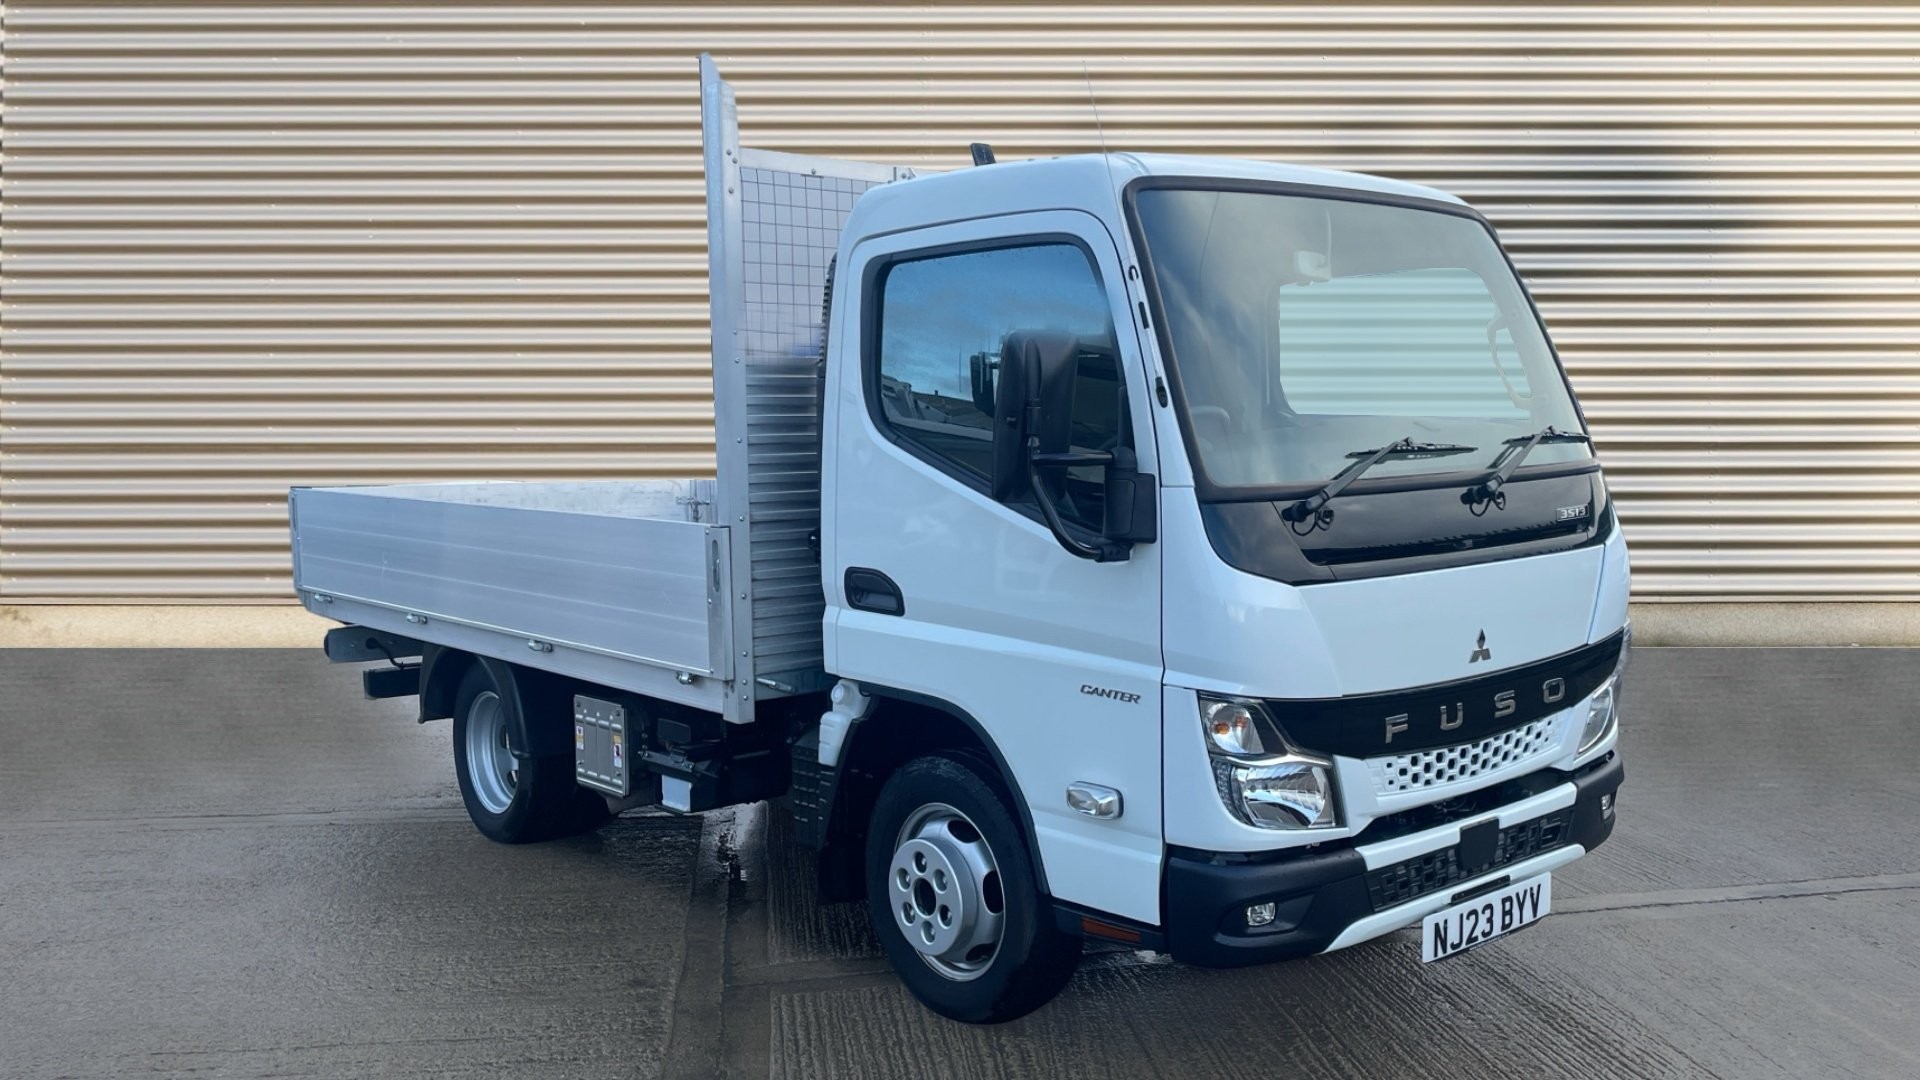 FUSO Canter 3S-13 Dropside